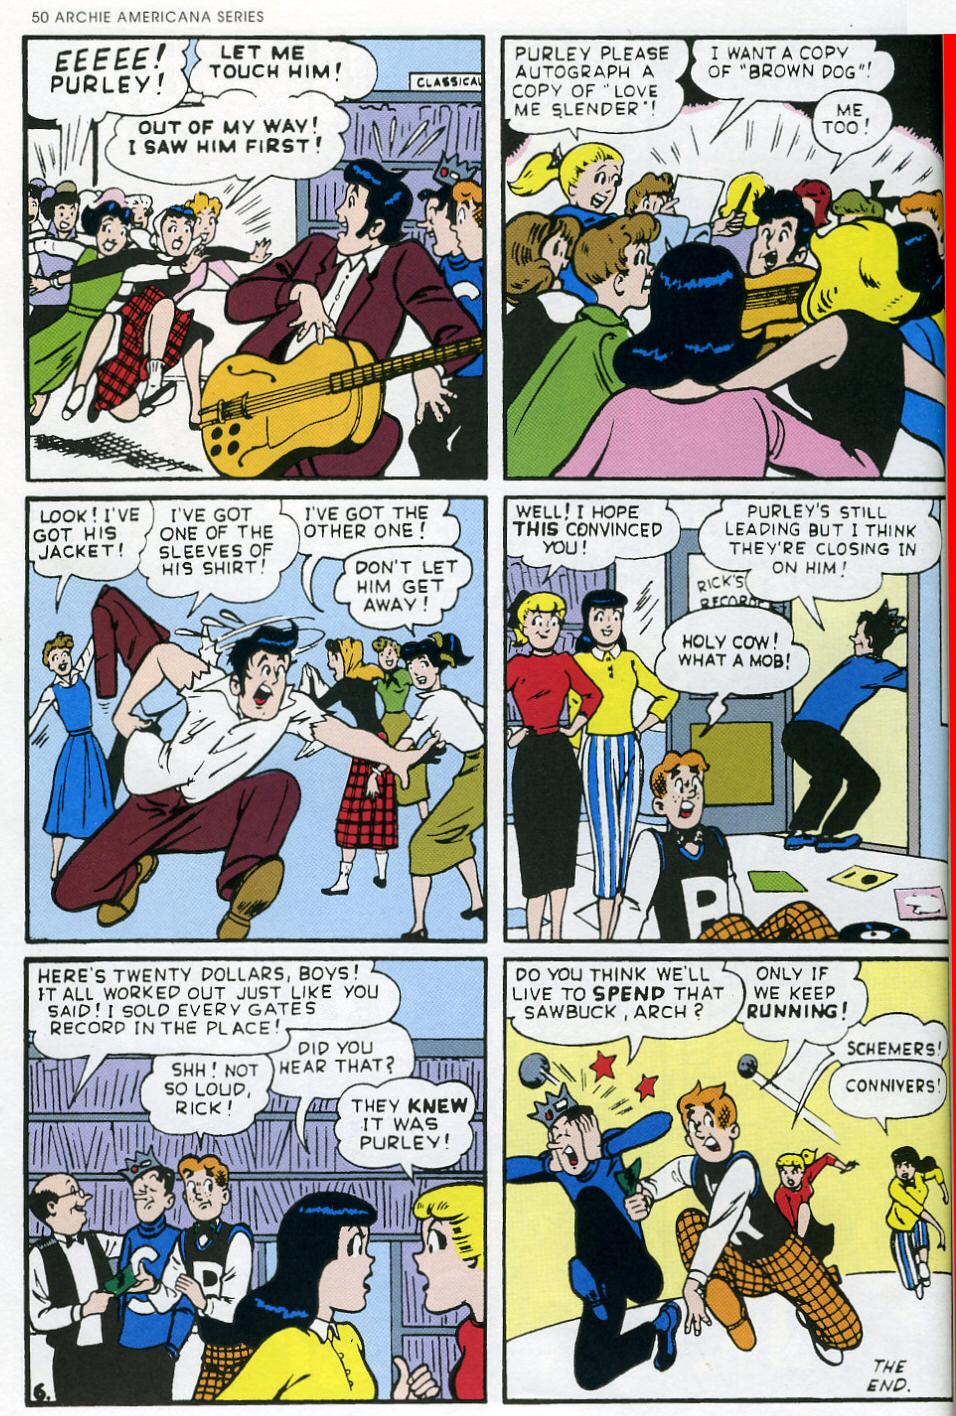 Read online Archie Americana Series comic -  Issue # TPB 2 - 52